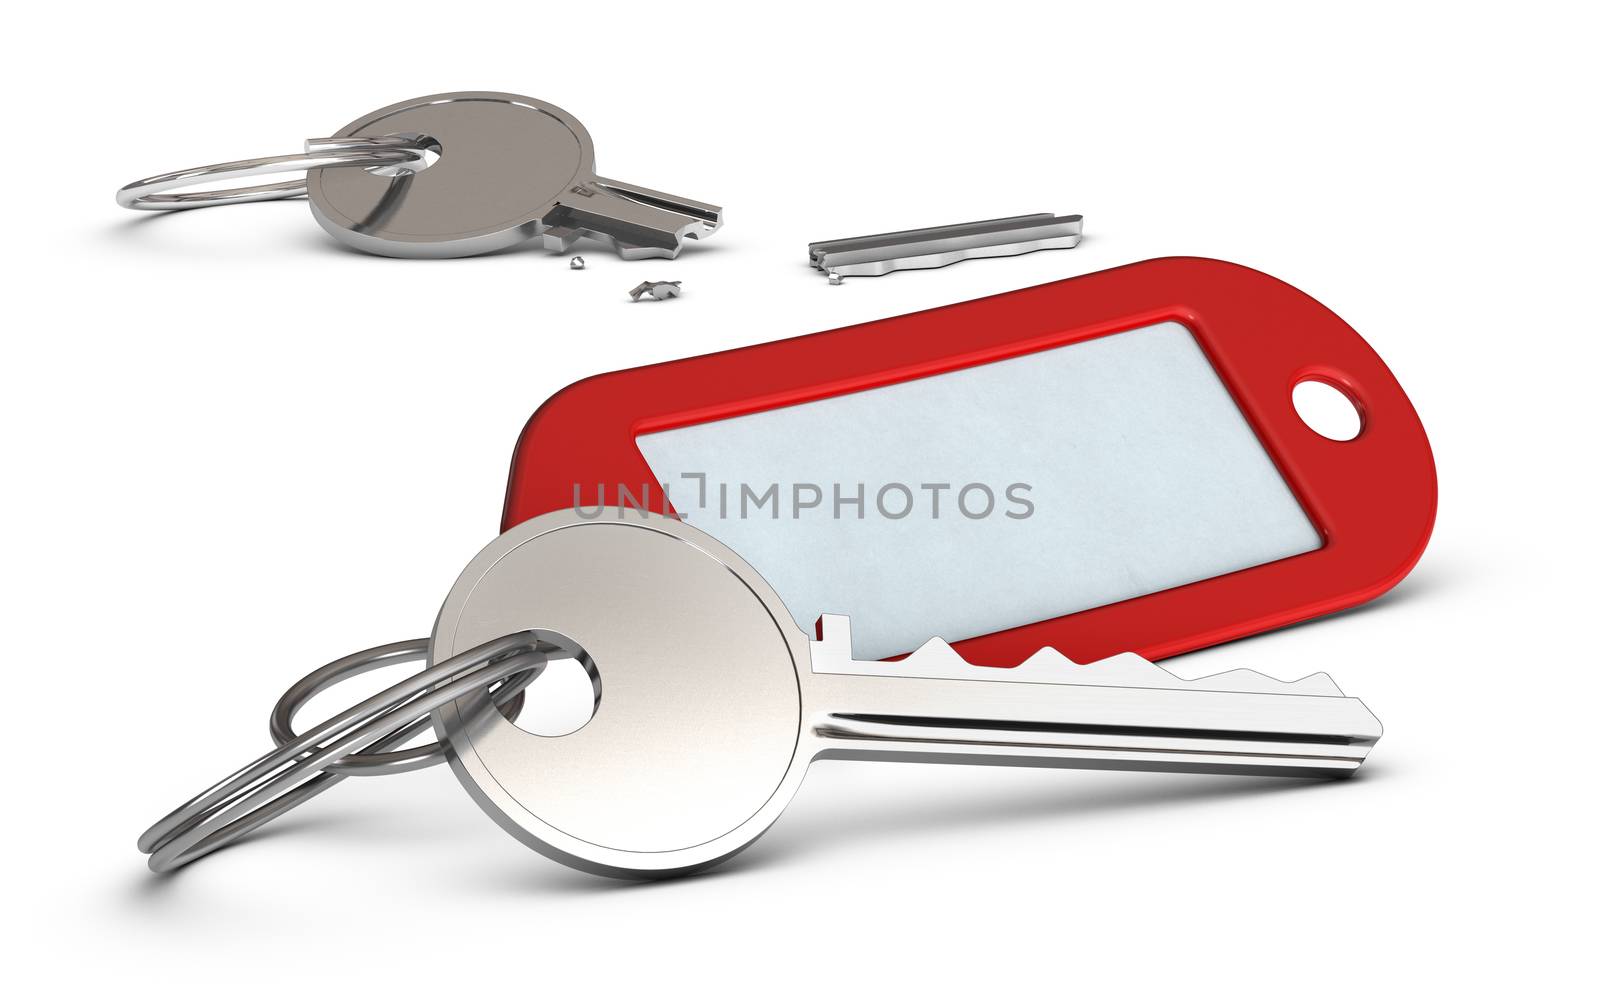 Duplicated key and red keyring and at the background a broken key, image over white 